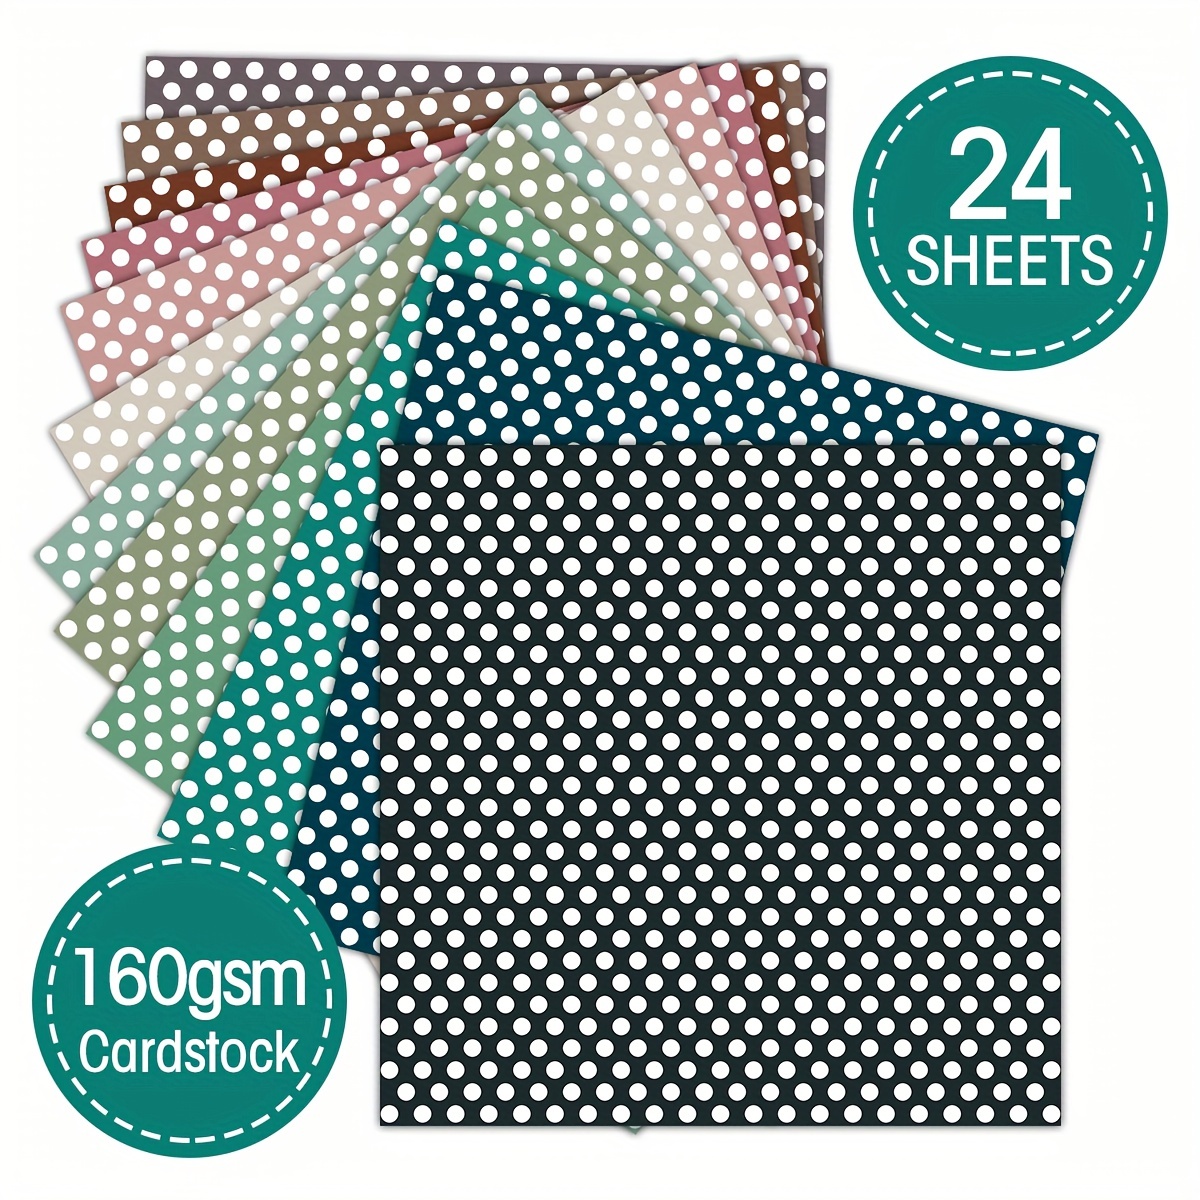 Gray on Gray Polka Dot Double Sided - 12x12 Scrapbook Paper